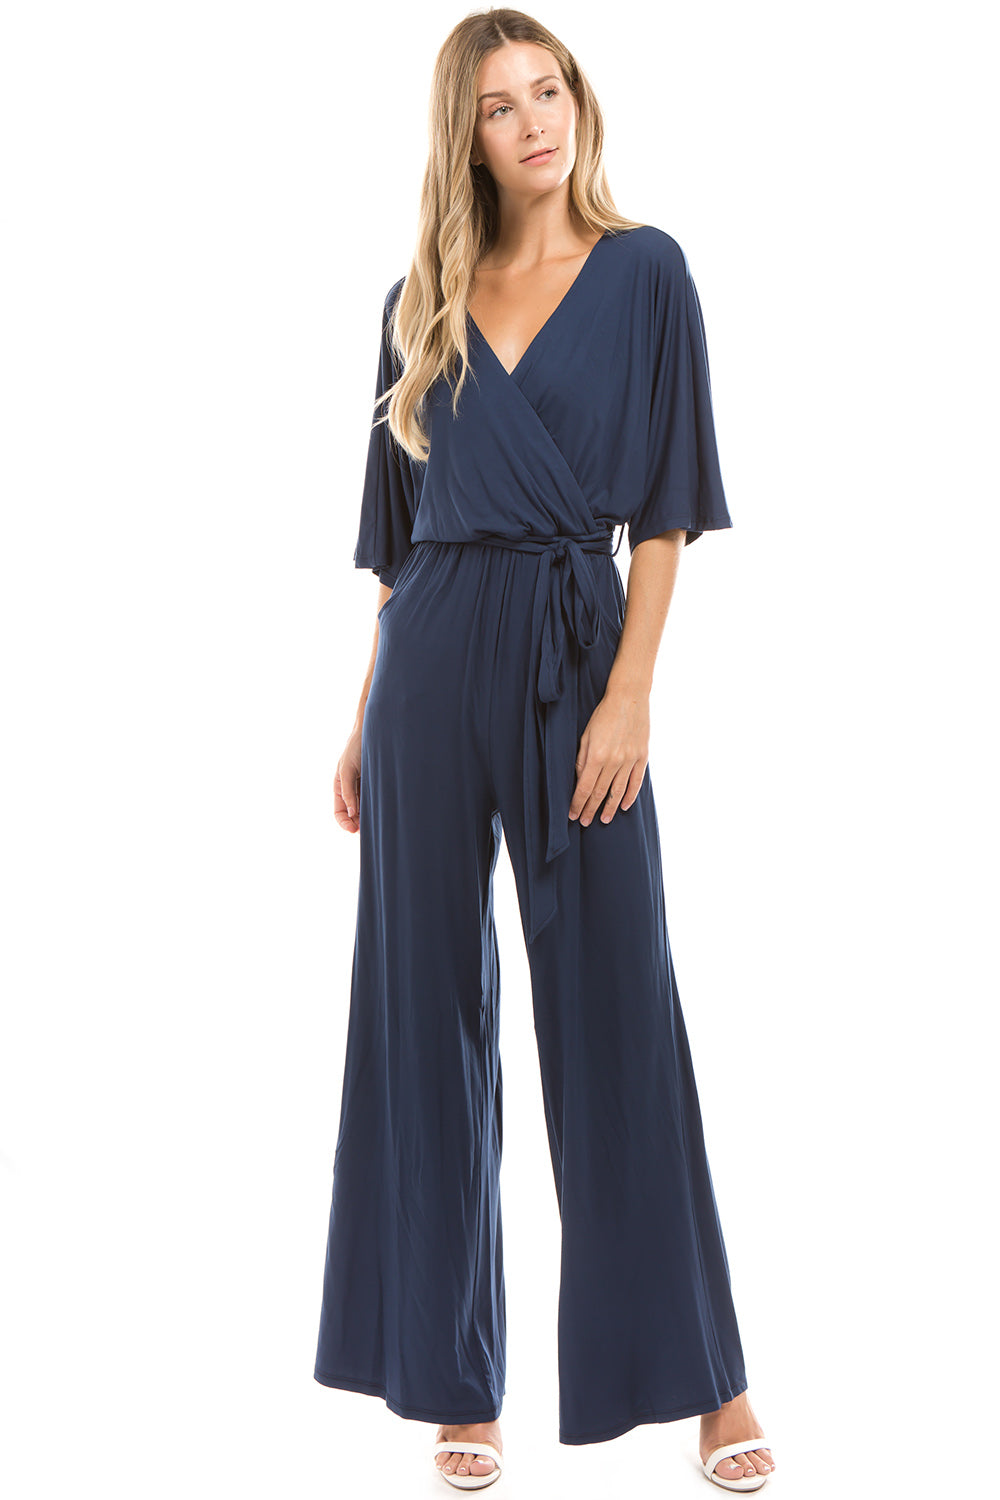 Buy Martini Navy Blue Solid Basic Jumpsuit - Jumpsuit for Women 2283540 |  Myntra